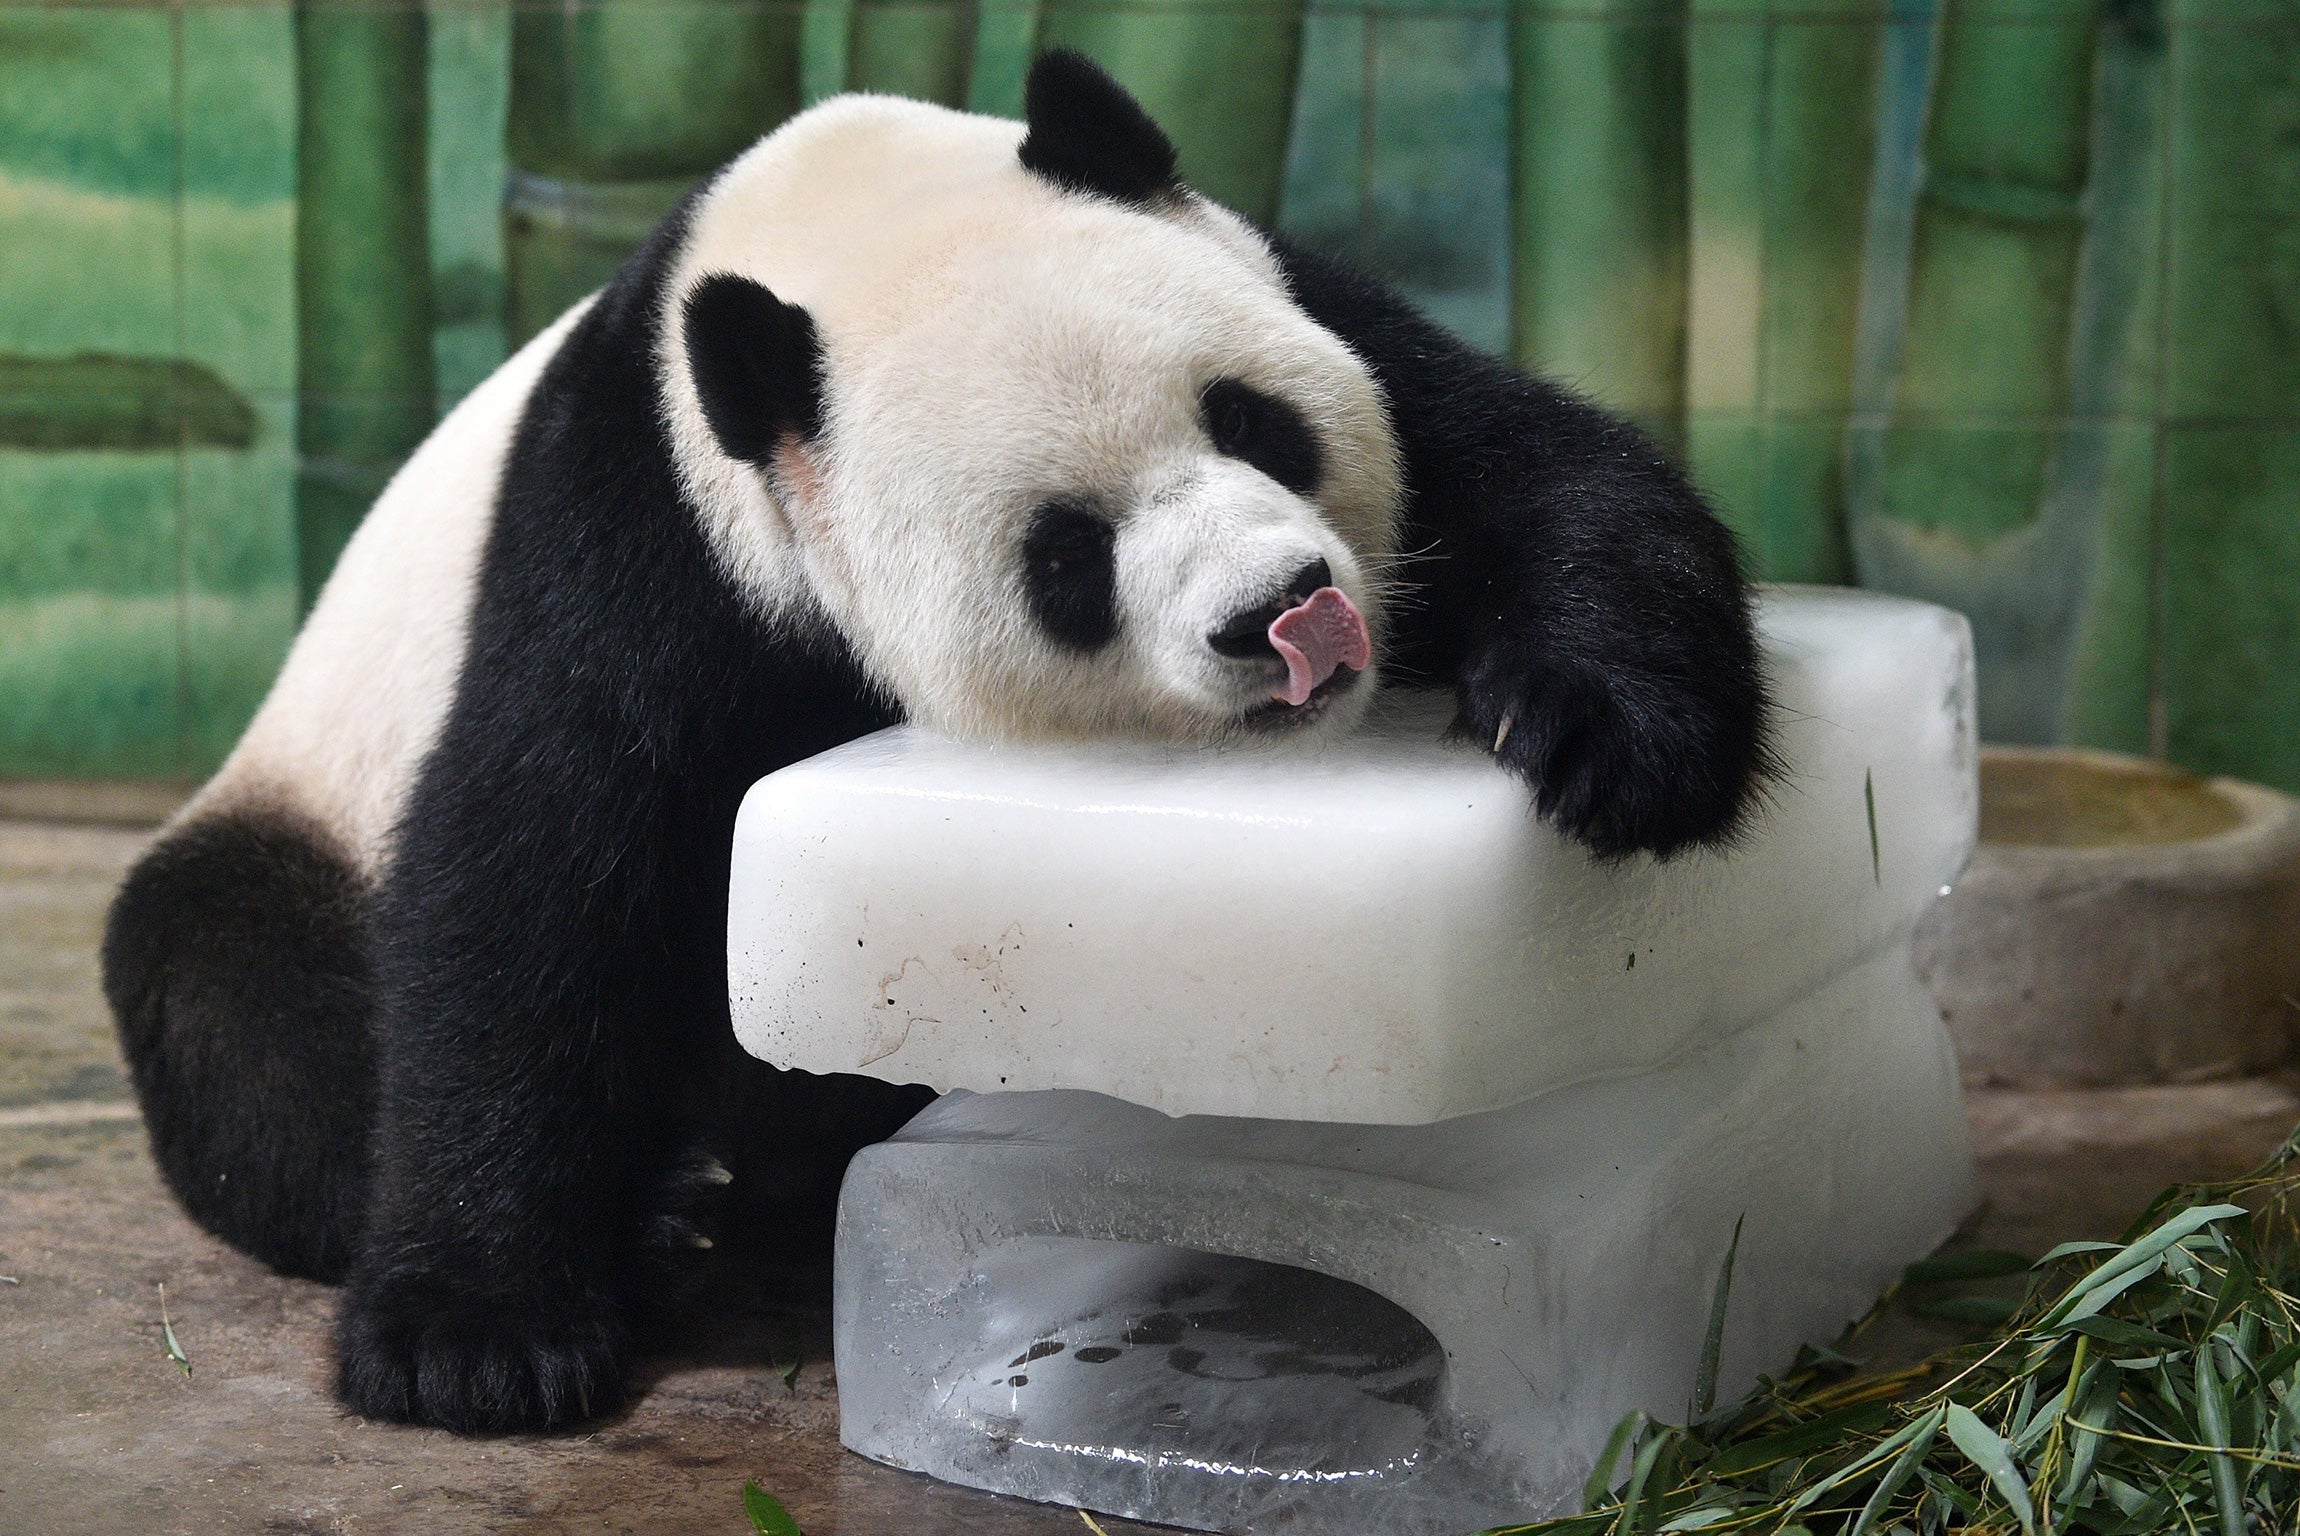 A giant panda puts itself on a huge ice cube to cool off during the heat wave in Wuhan, China